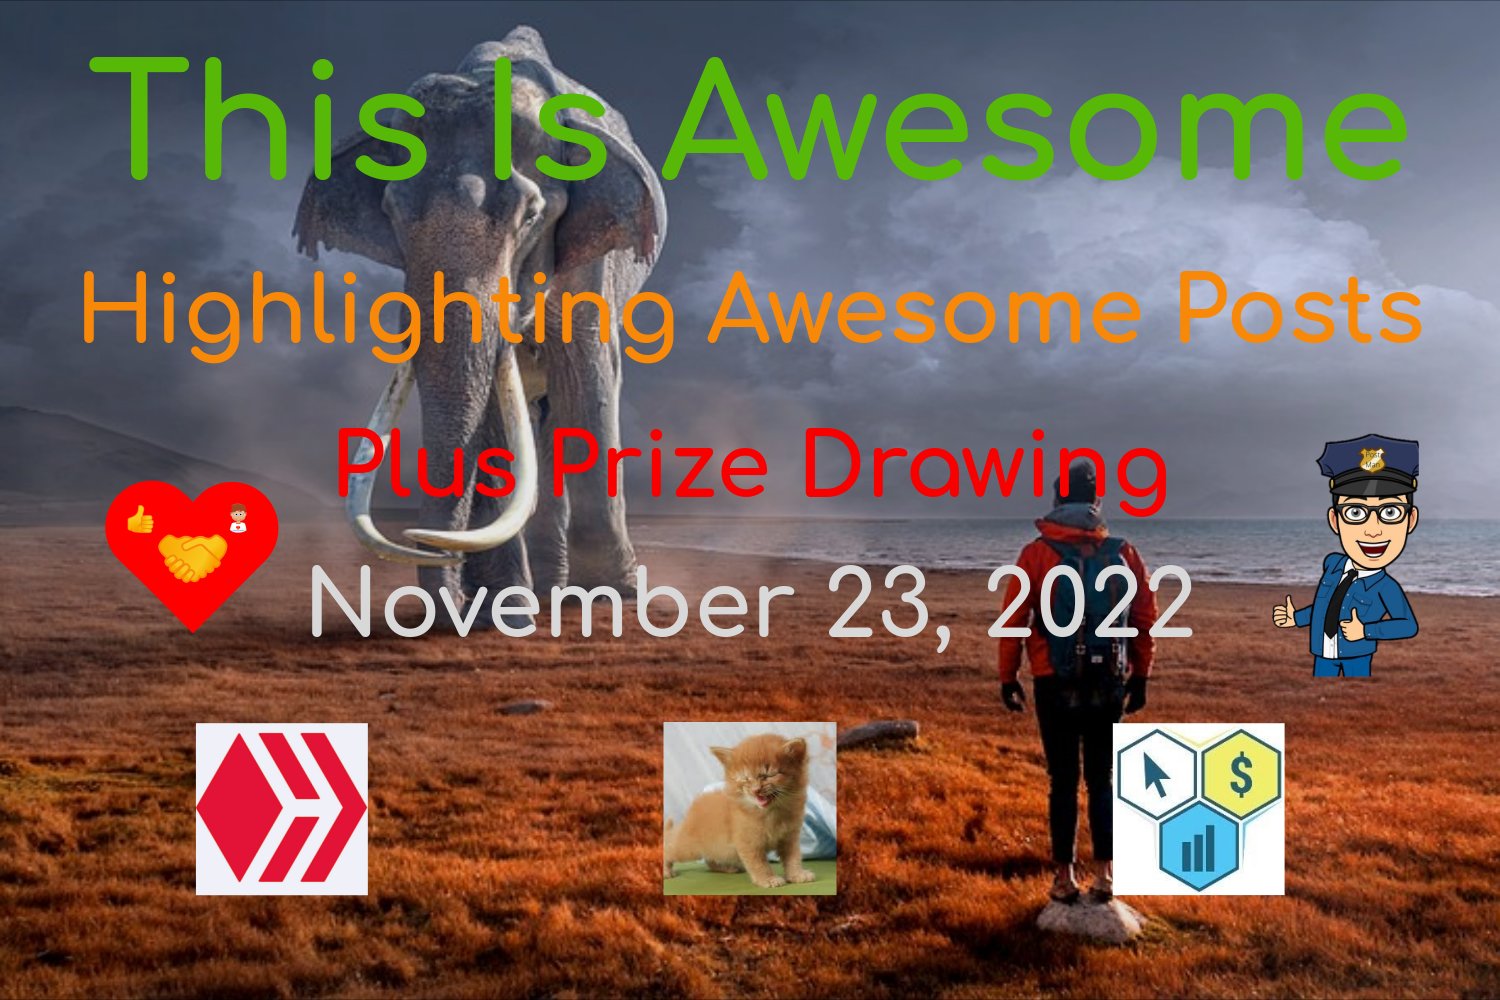 @thisisawesome/this-is-awesome-highlighting-awesome-posts-plus-prize-drawing-november-23-2022